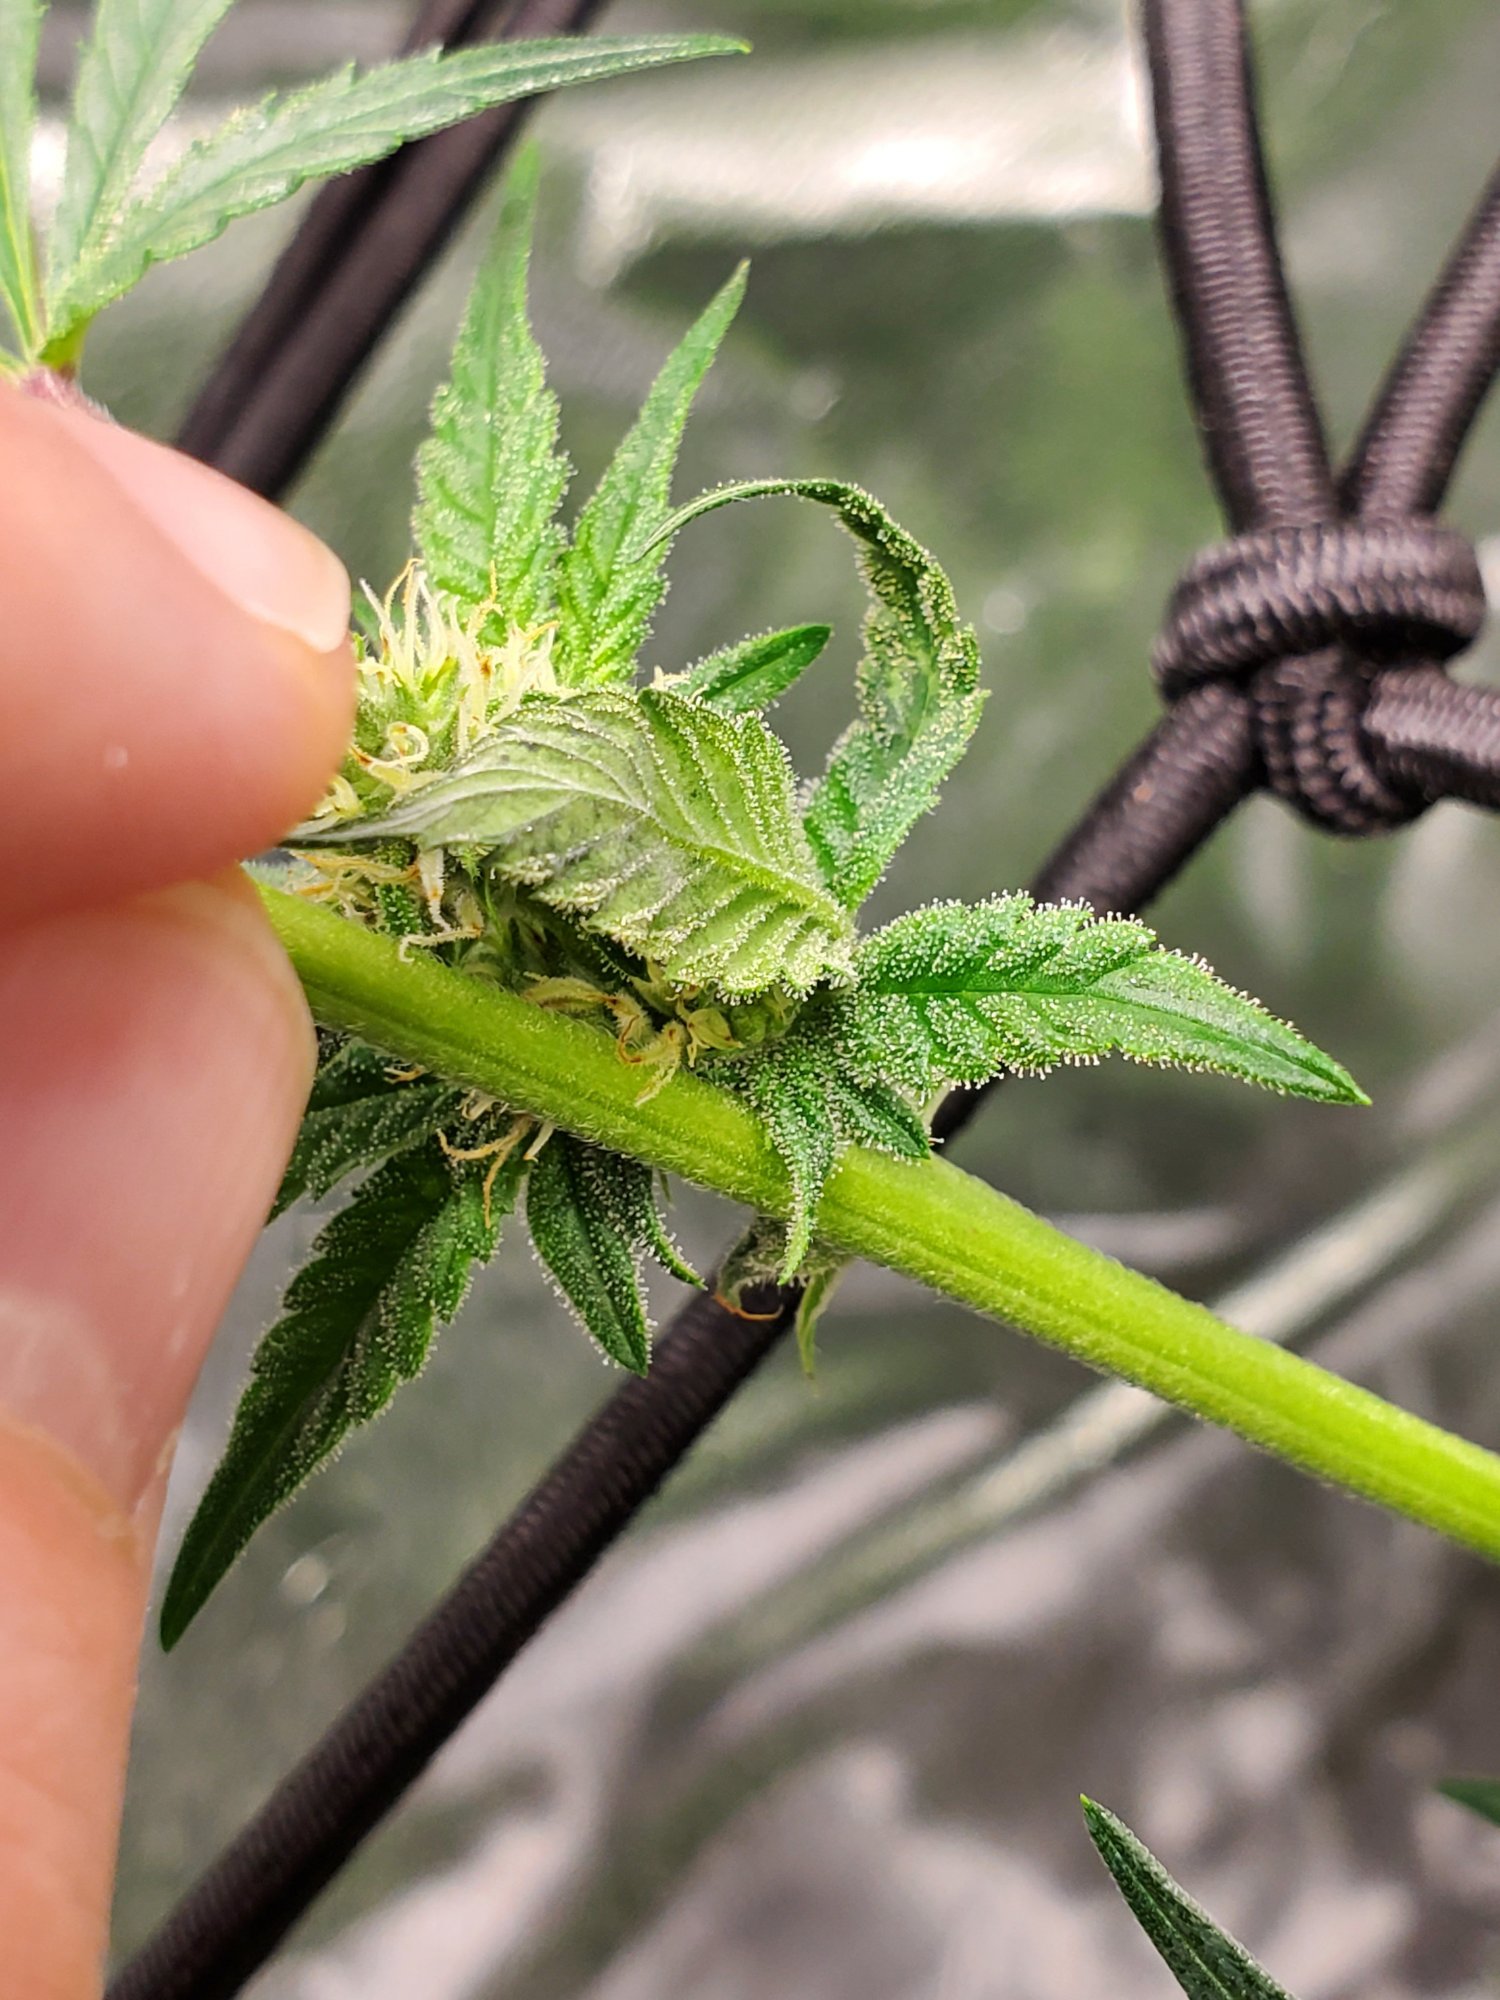 Thrips to black spots to leaf tips curling up in week 4 flower 16